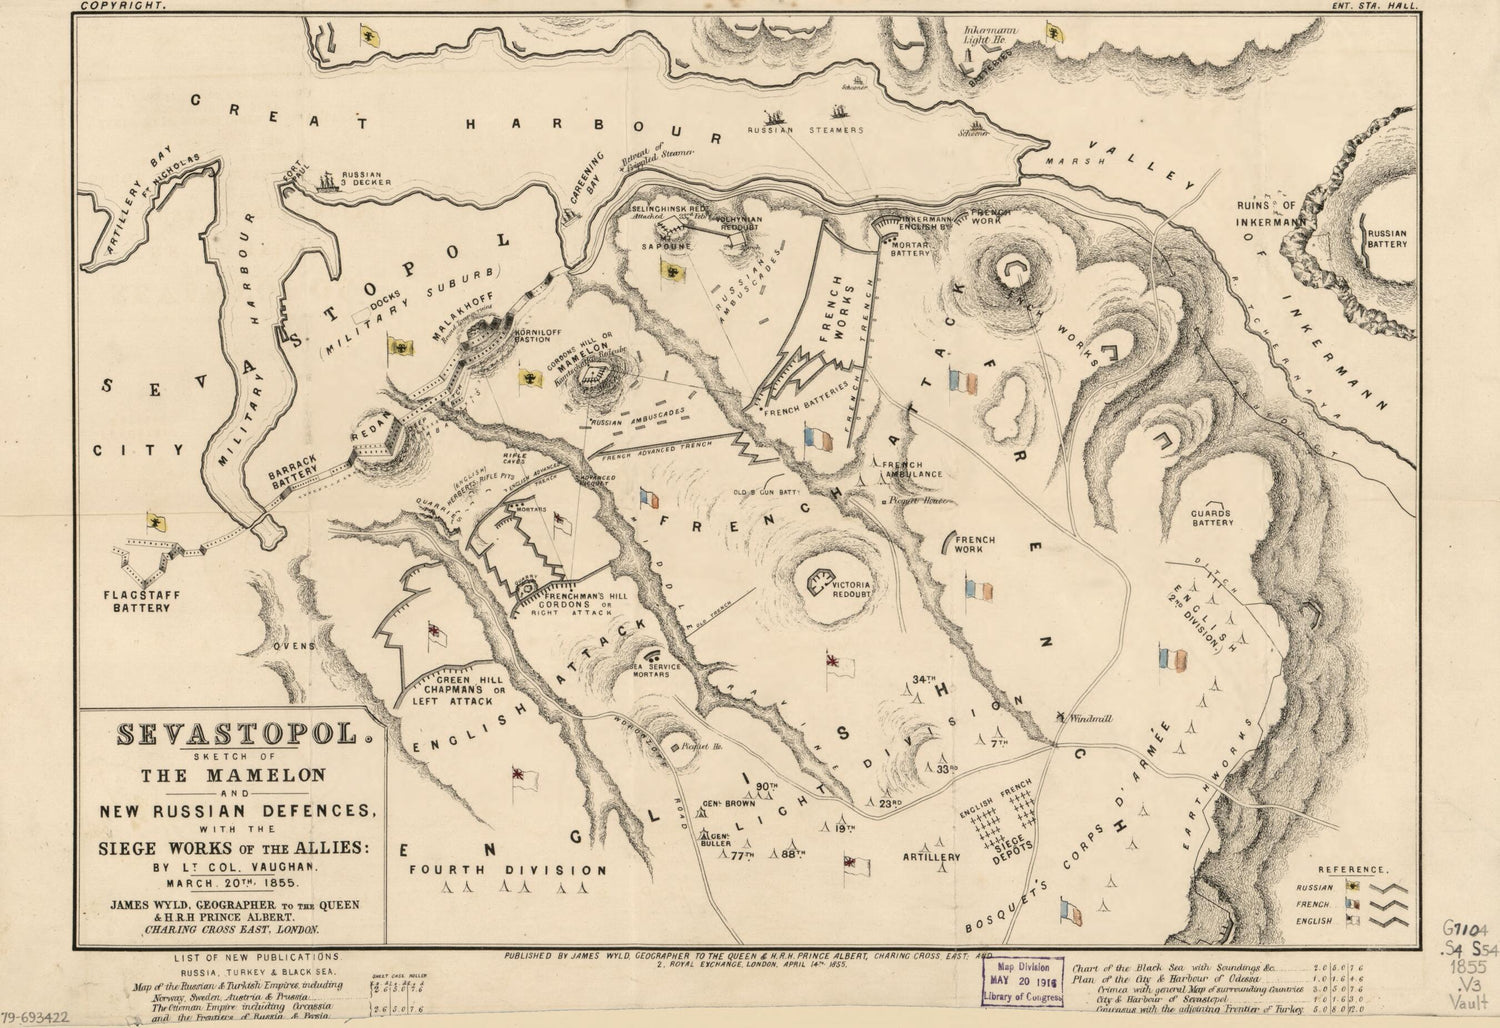 This old map of Sevastopol, Sketch of the Mamelon and New Russian Defences, With the Siege Works of the Allies from 1855 was created by Millard Fillmore, Eugene James Vaughan, James Wyld in 1855